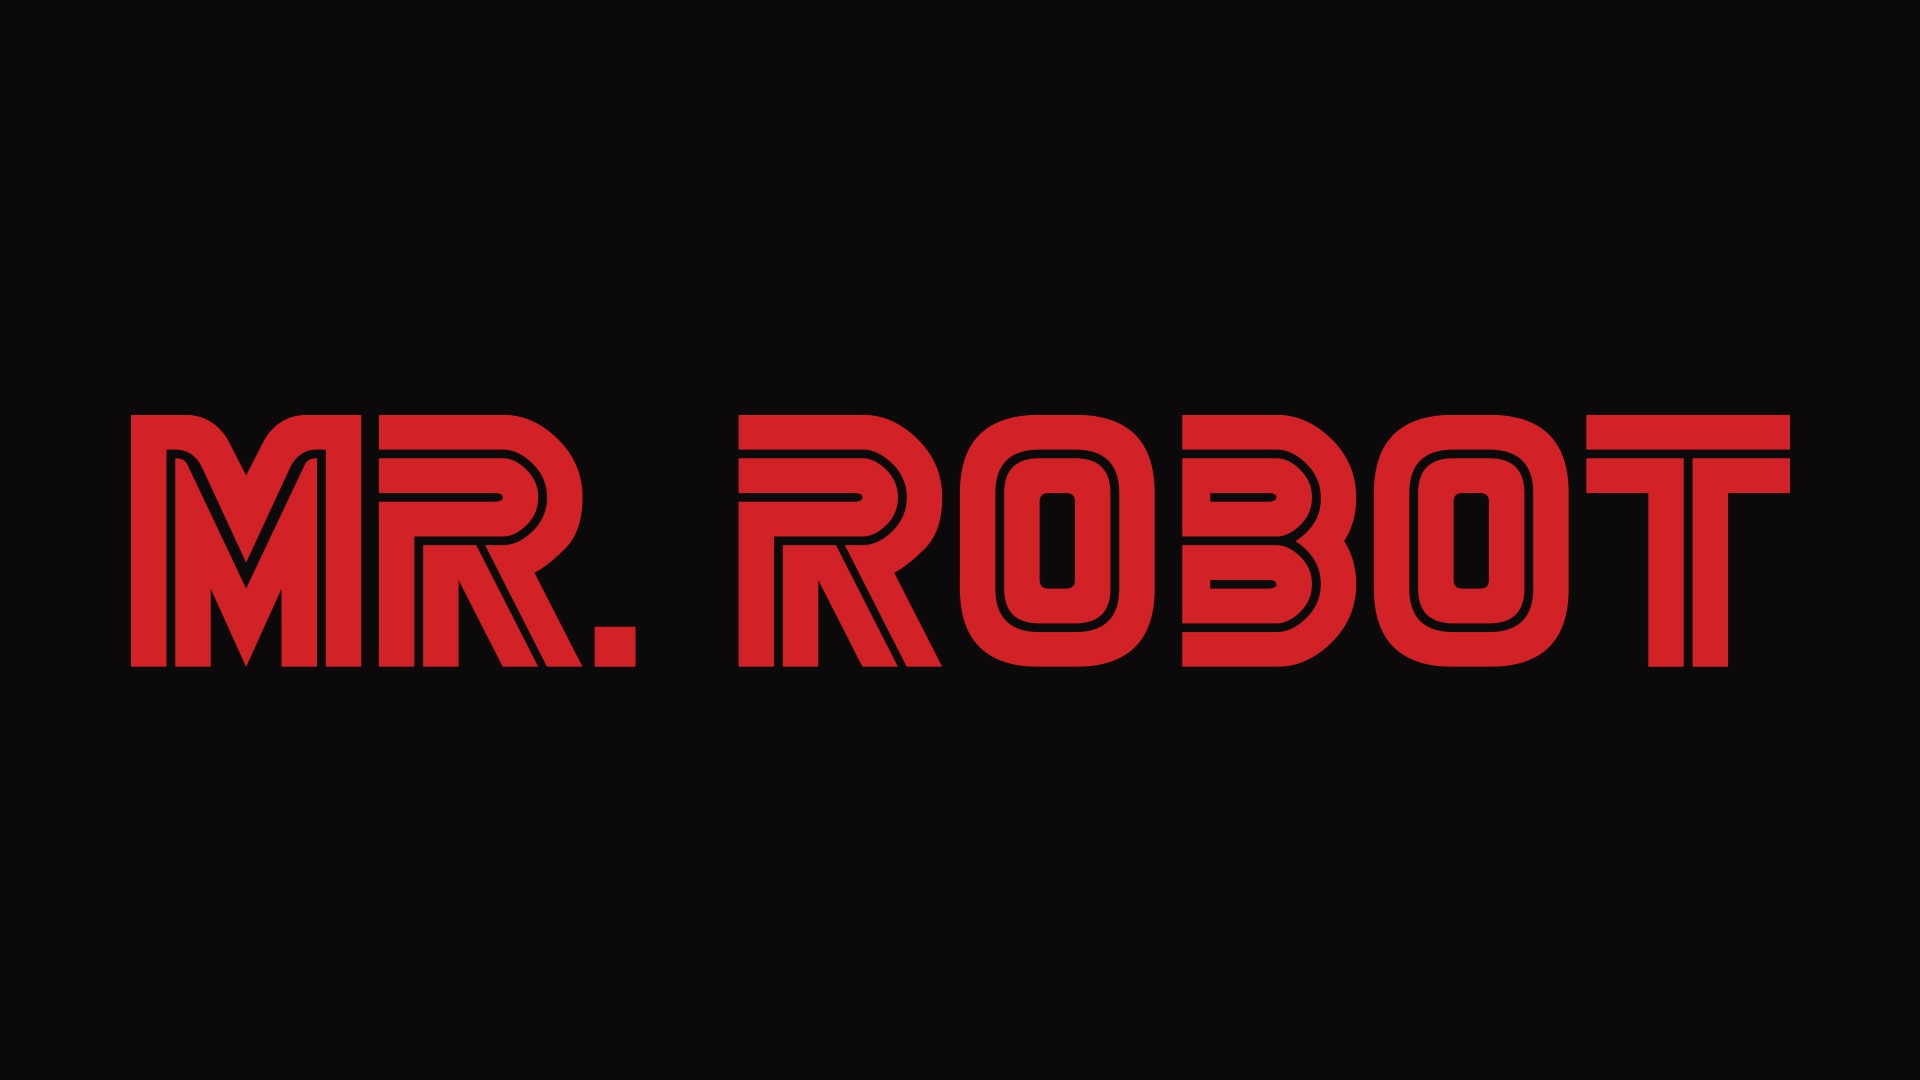 USA Network Surprises Fans With 'Mr. Robot' Stream on Facebook Live - WSJ